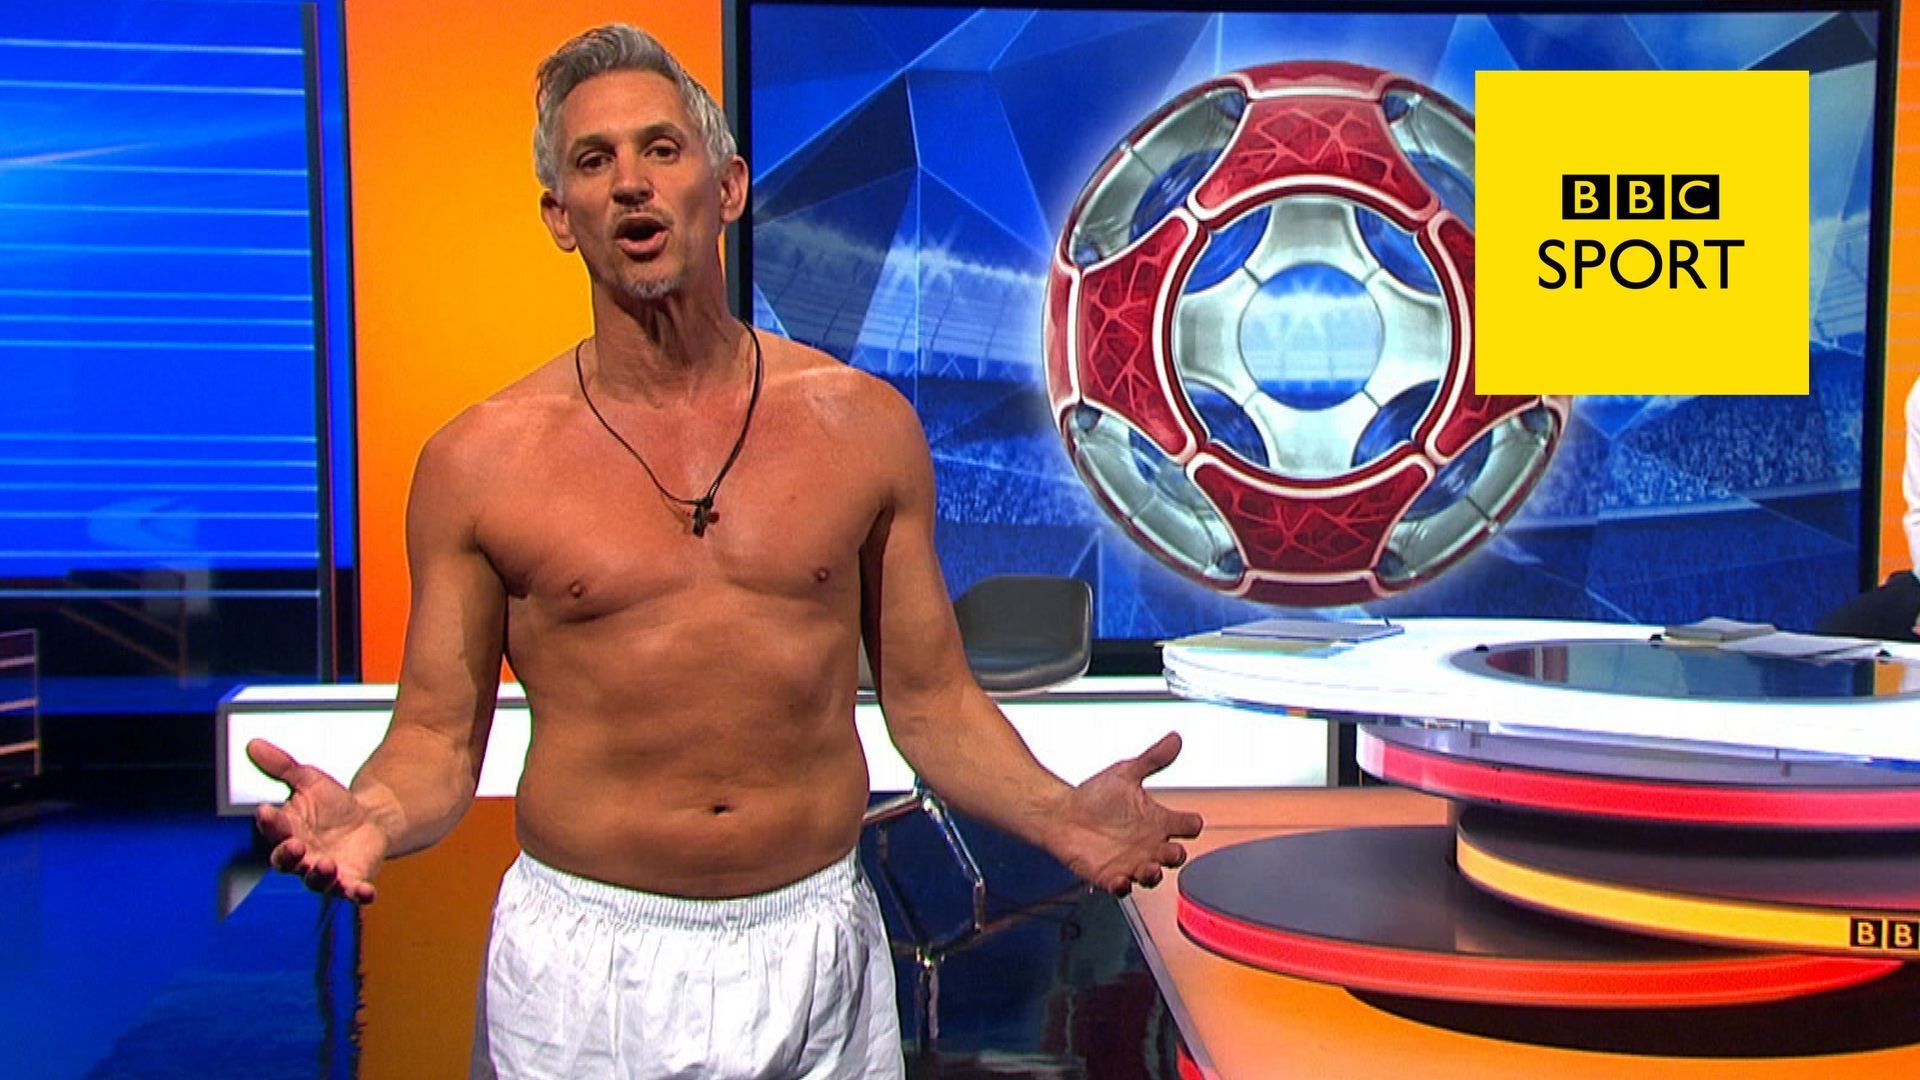 Gary Lineker in the nude on Match of the Day â€“ disgusting!\